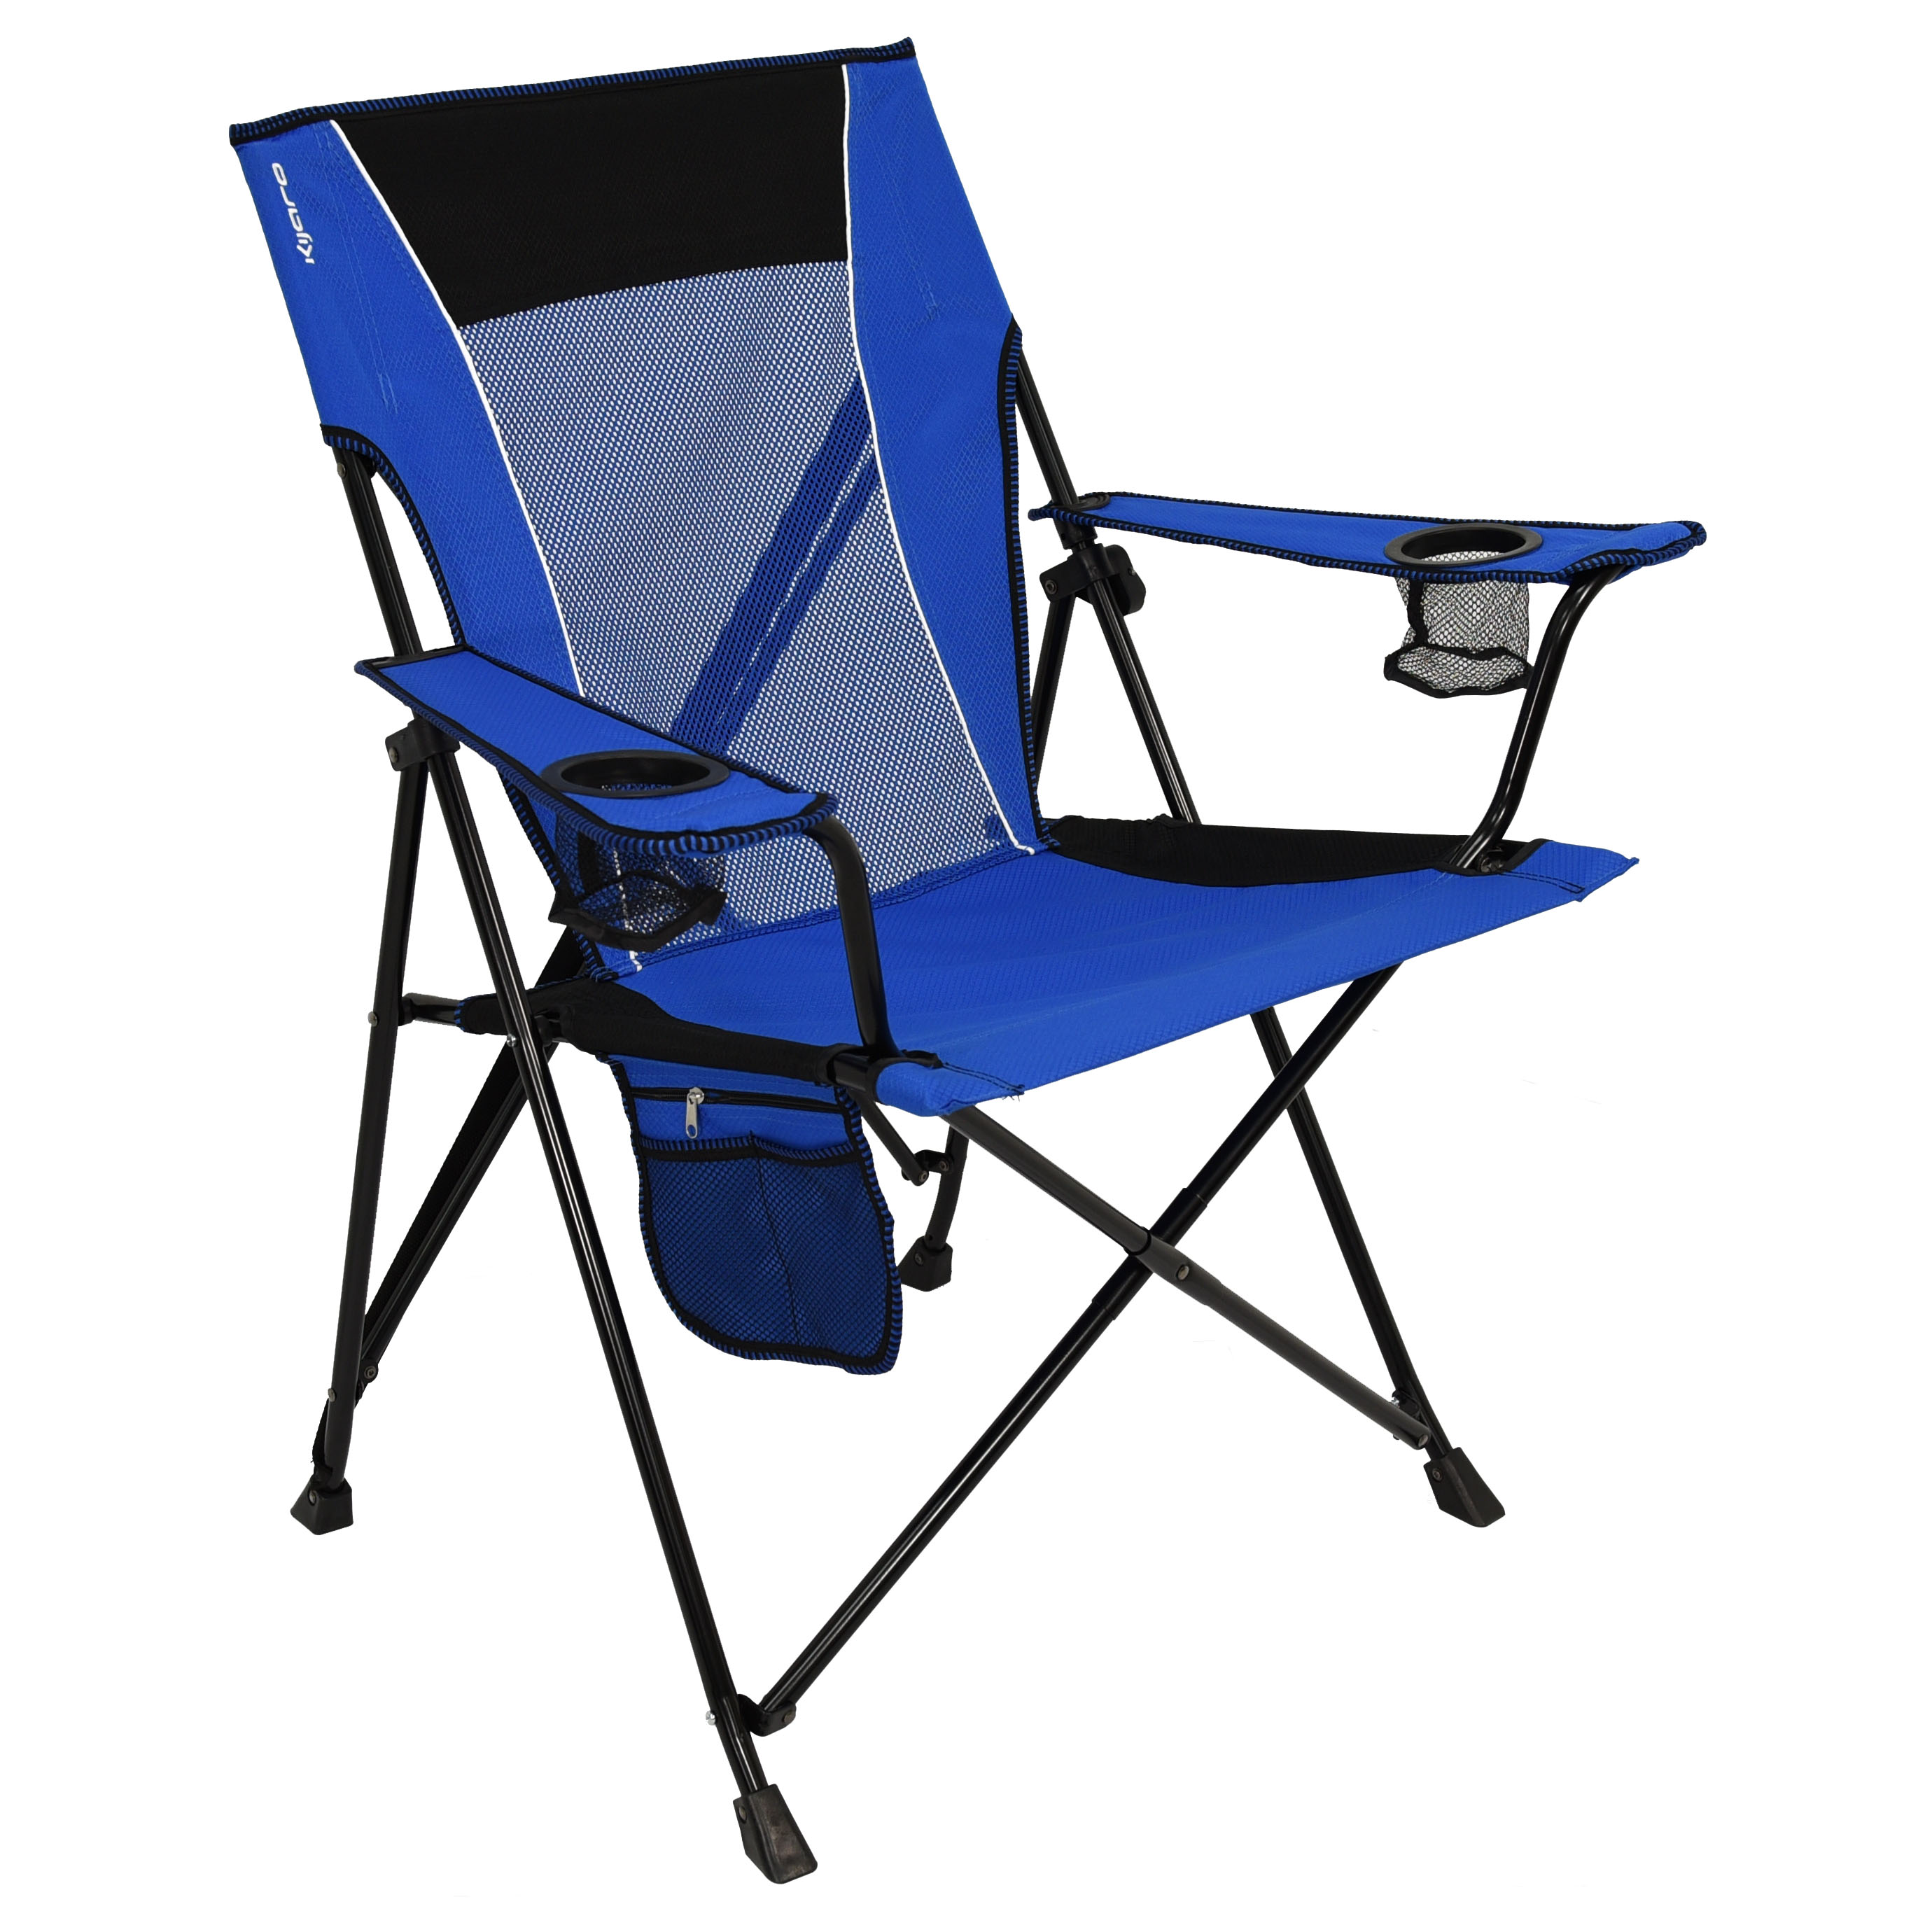 Kijaro Maldives Blue Recycled Repreve Fabric Dual Lock Camping Chair, 26 in. L x 35.5 in. W x 37 in" H, Weight 9.6 lbs. - image 2 of 3